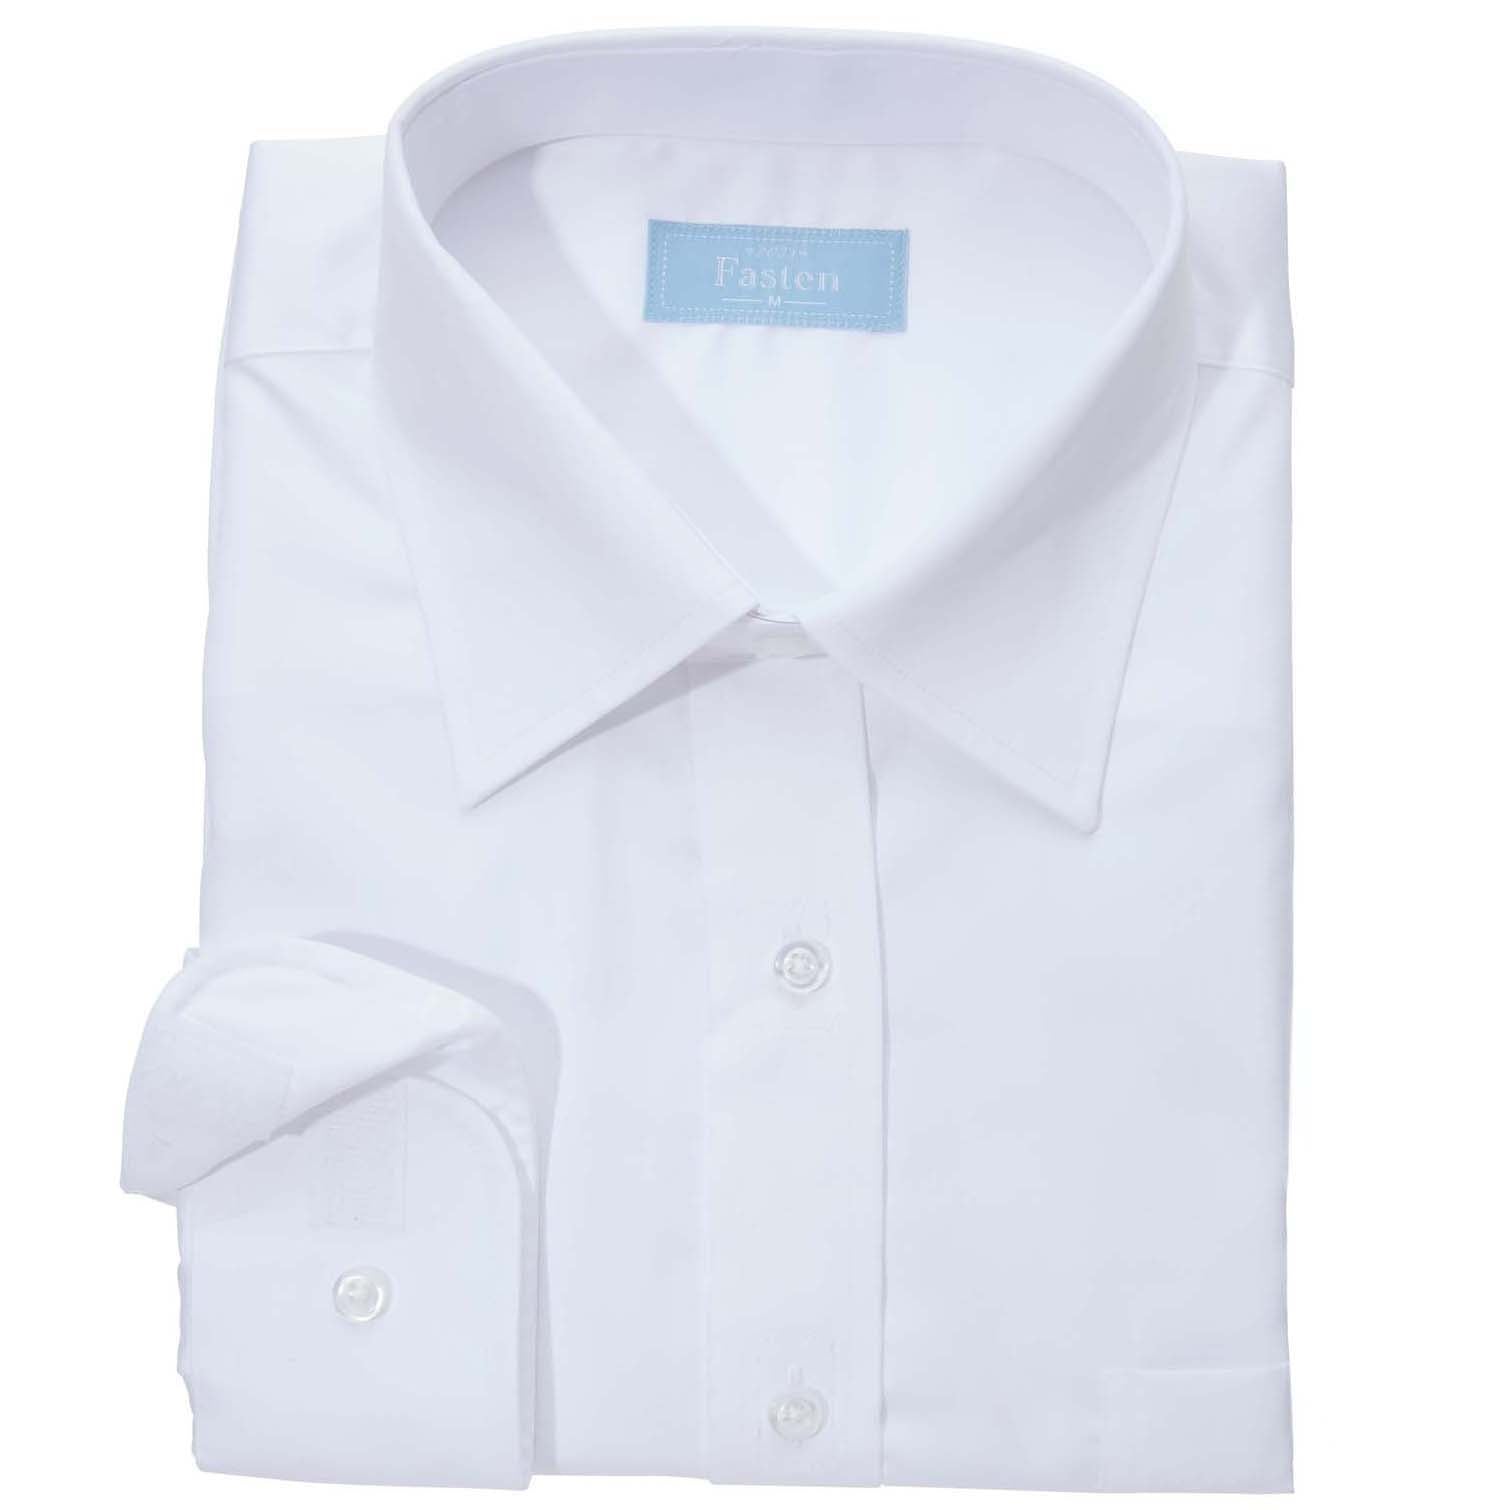 The Fasten Launch Shirt in white with open cuff